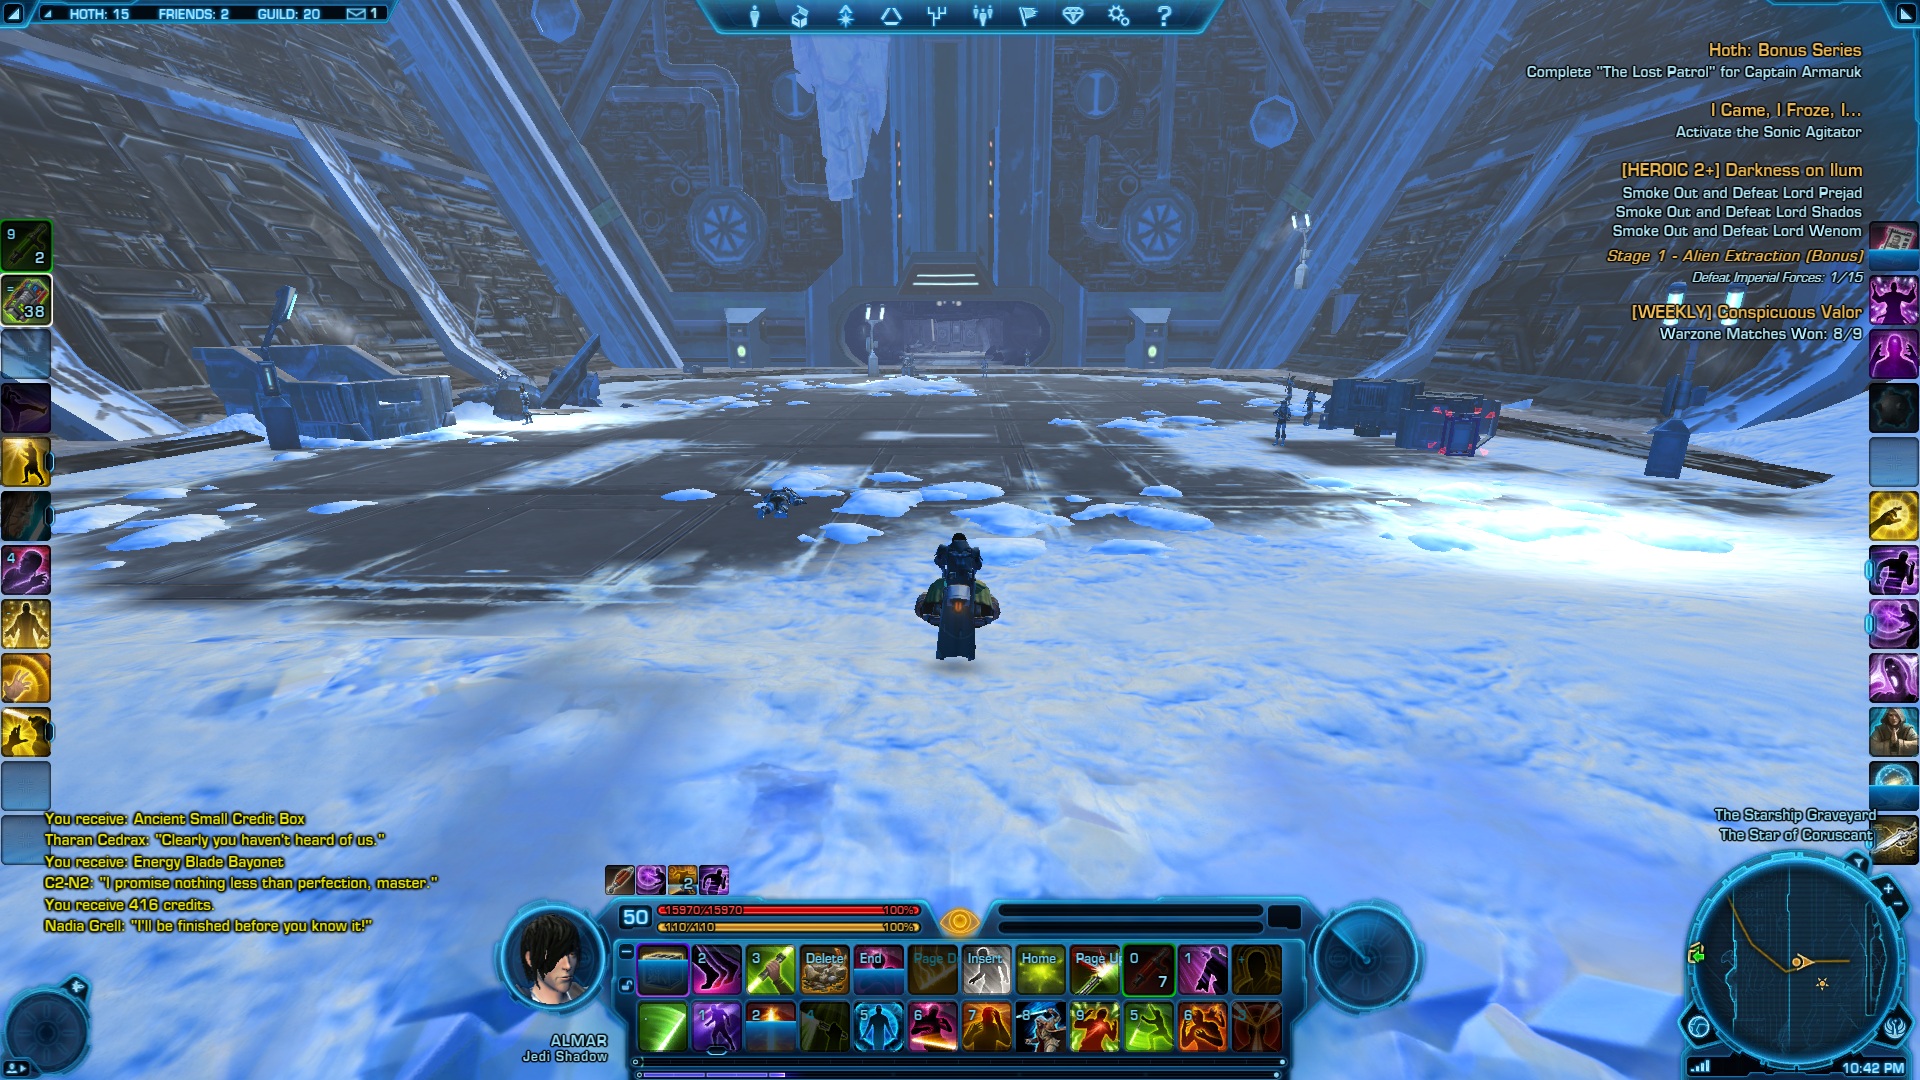 Entrance to the Star of Coruscant on Hoth